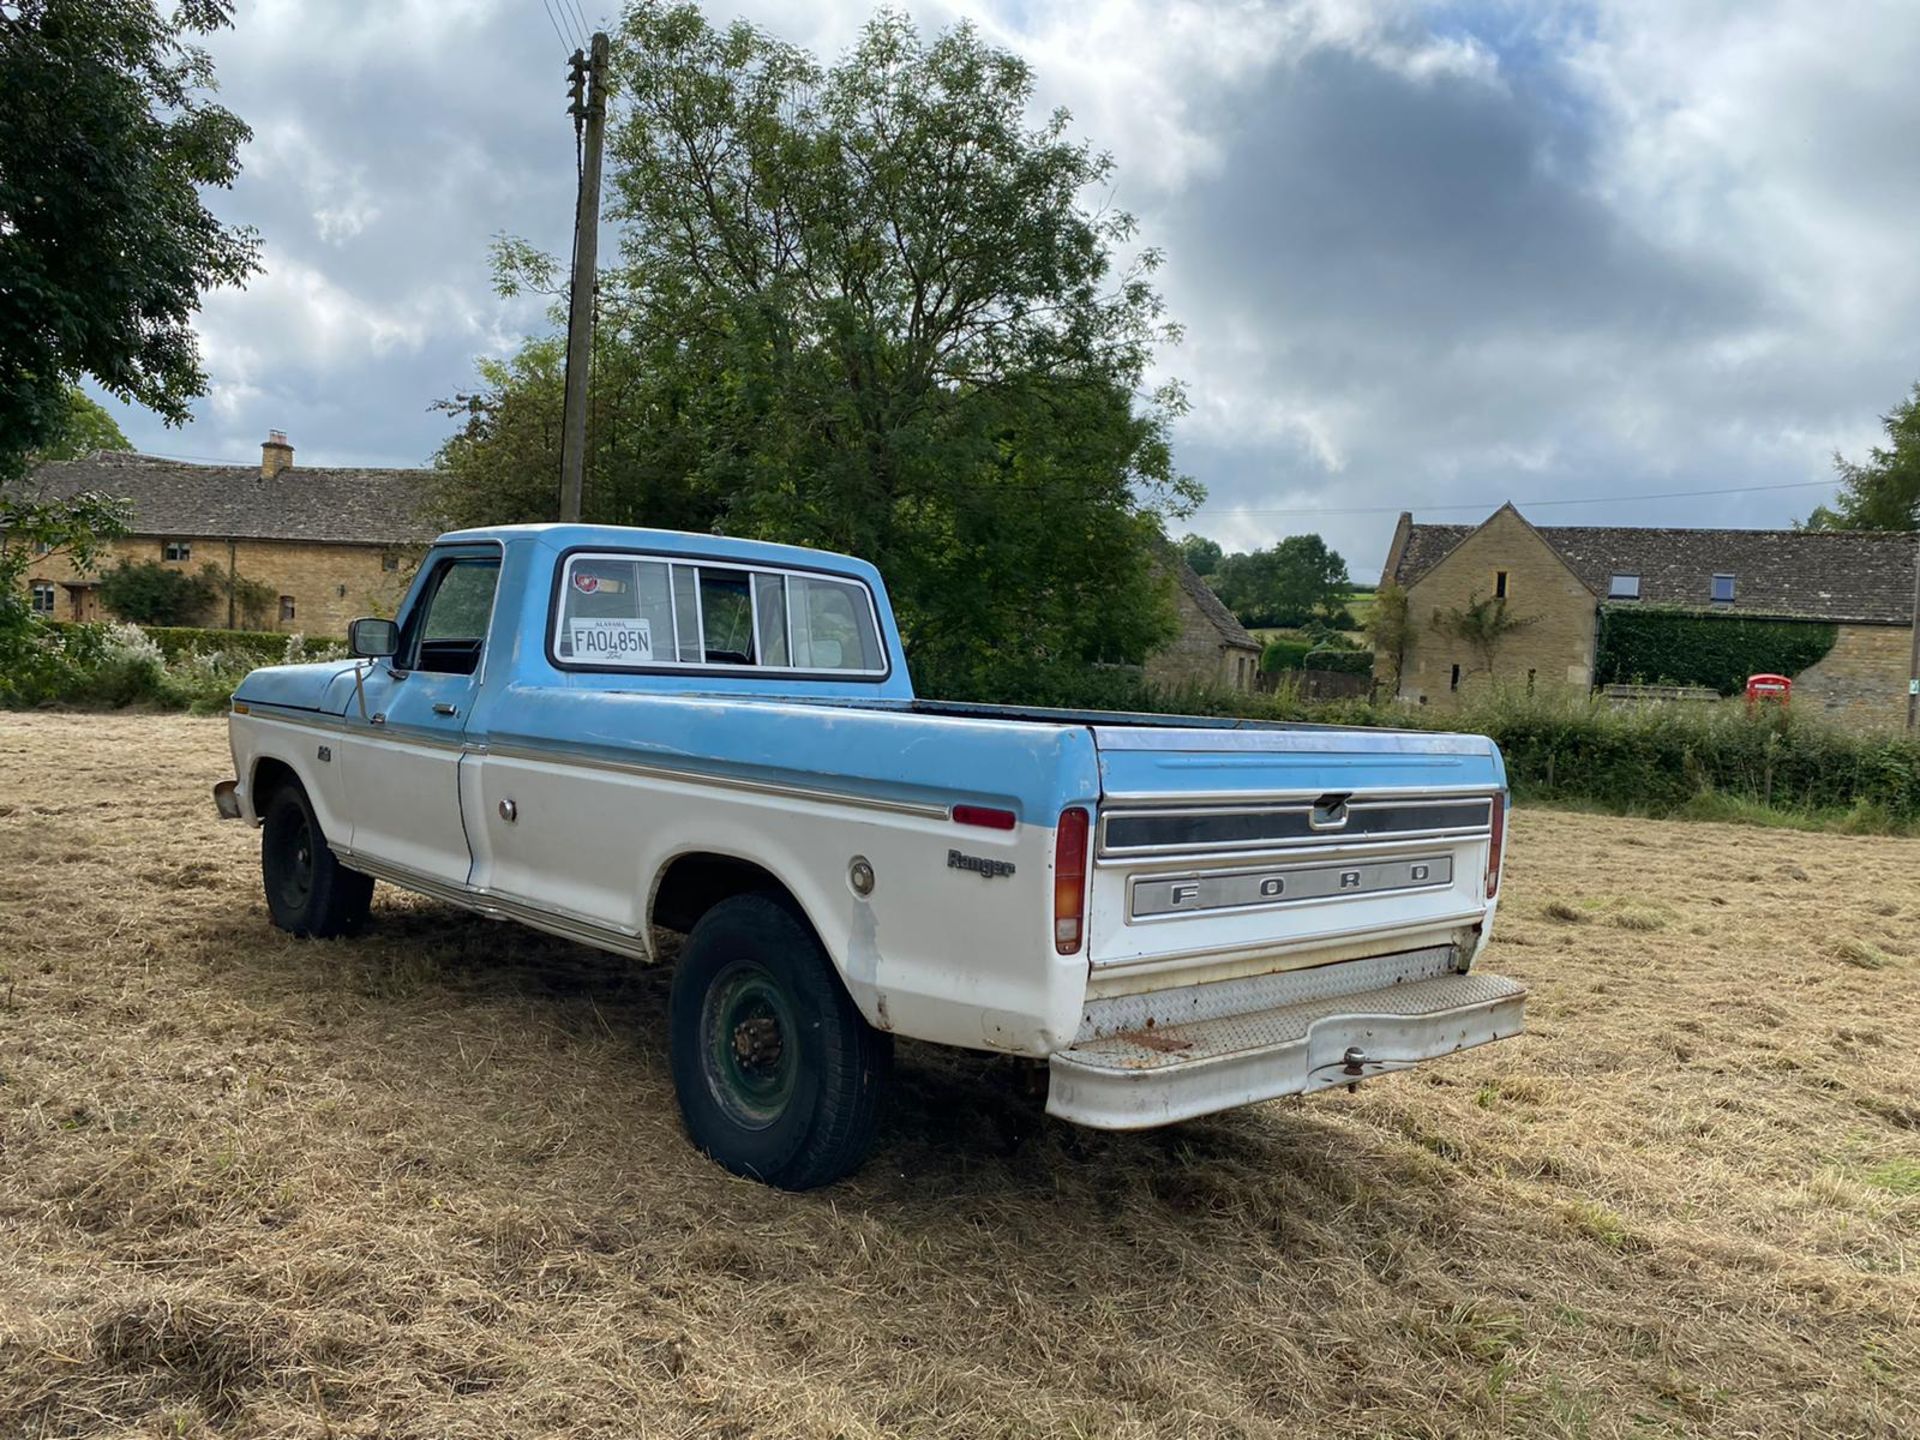 1975 FORD F-250 6.4 (390) V8, 4 SPEED MANUAL, HAS JUST BEEN REGISTERED, NEW BENCH SEAT *NO VAT* - Image 10 of 22